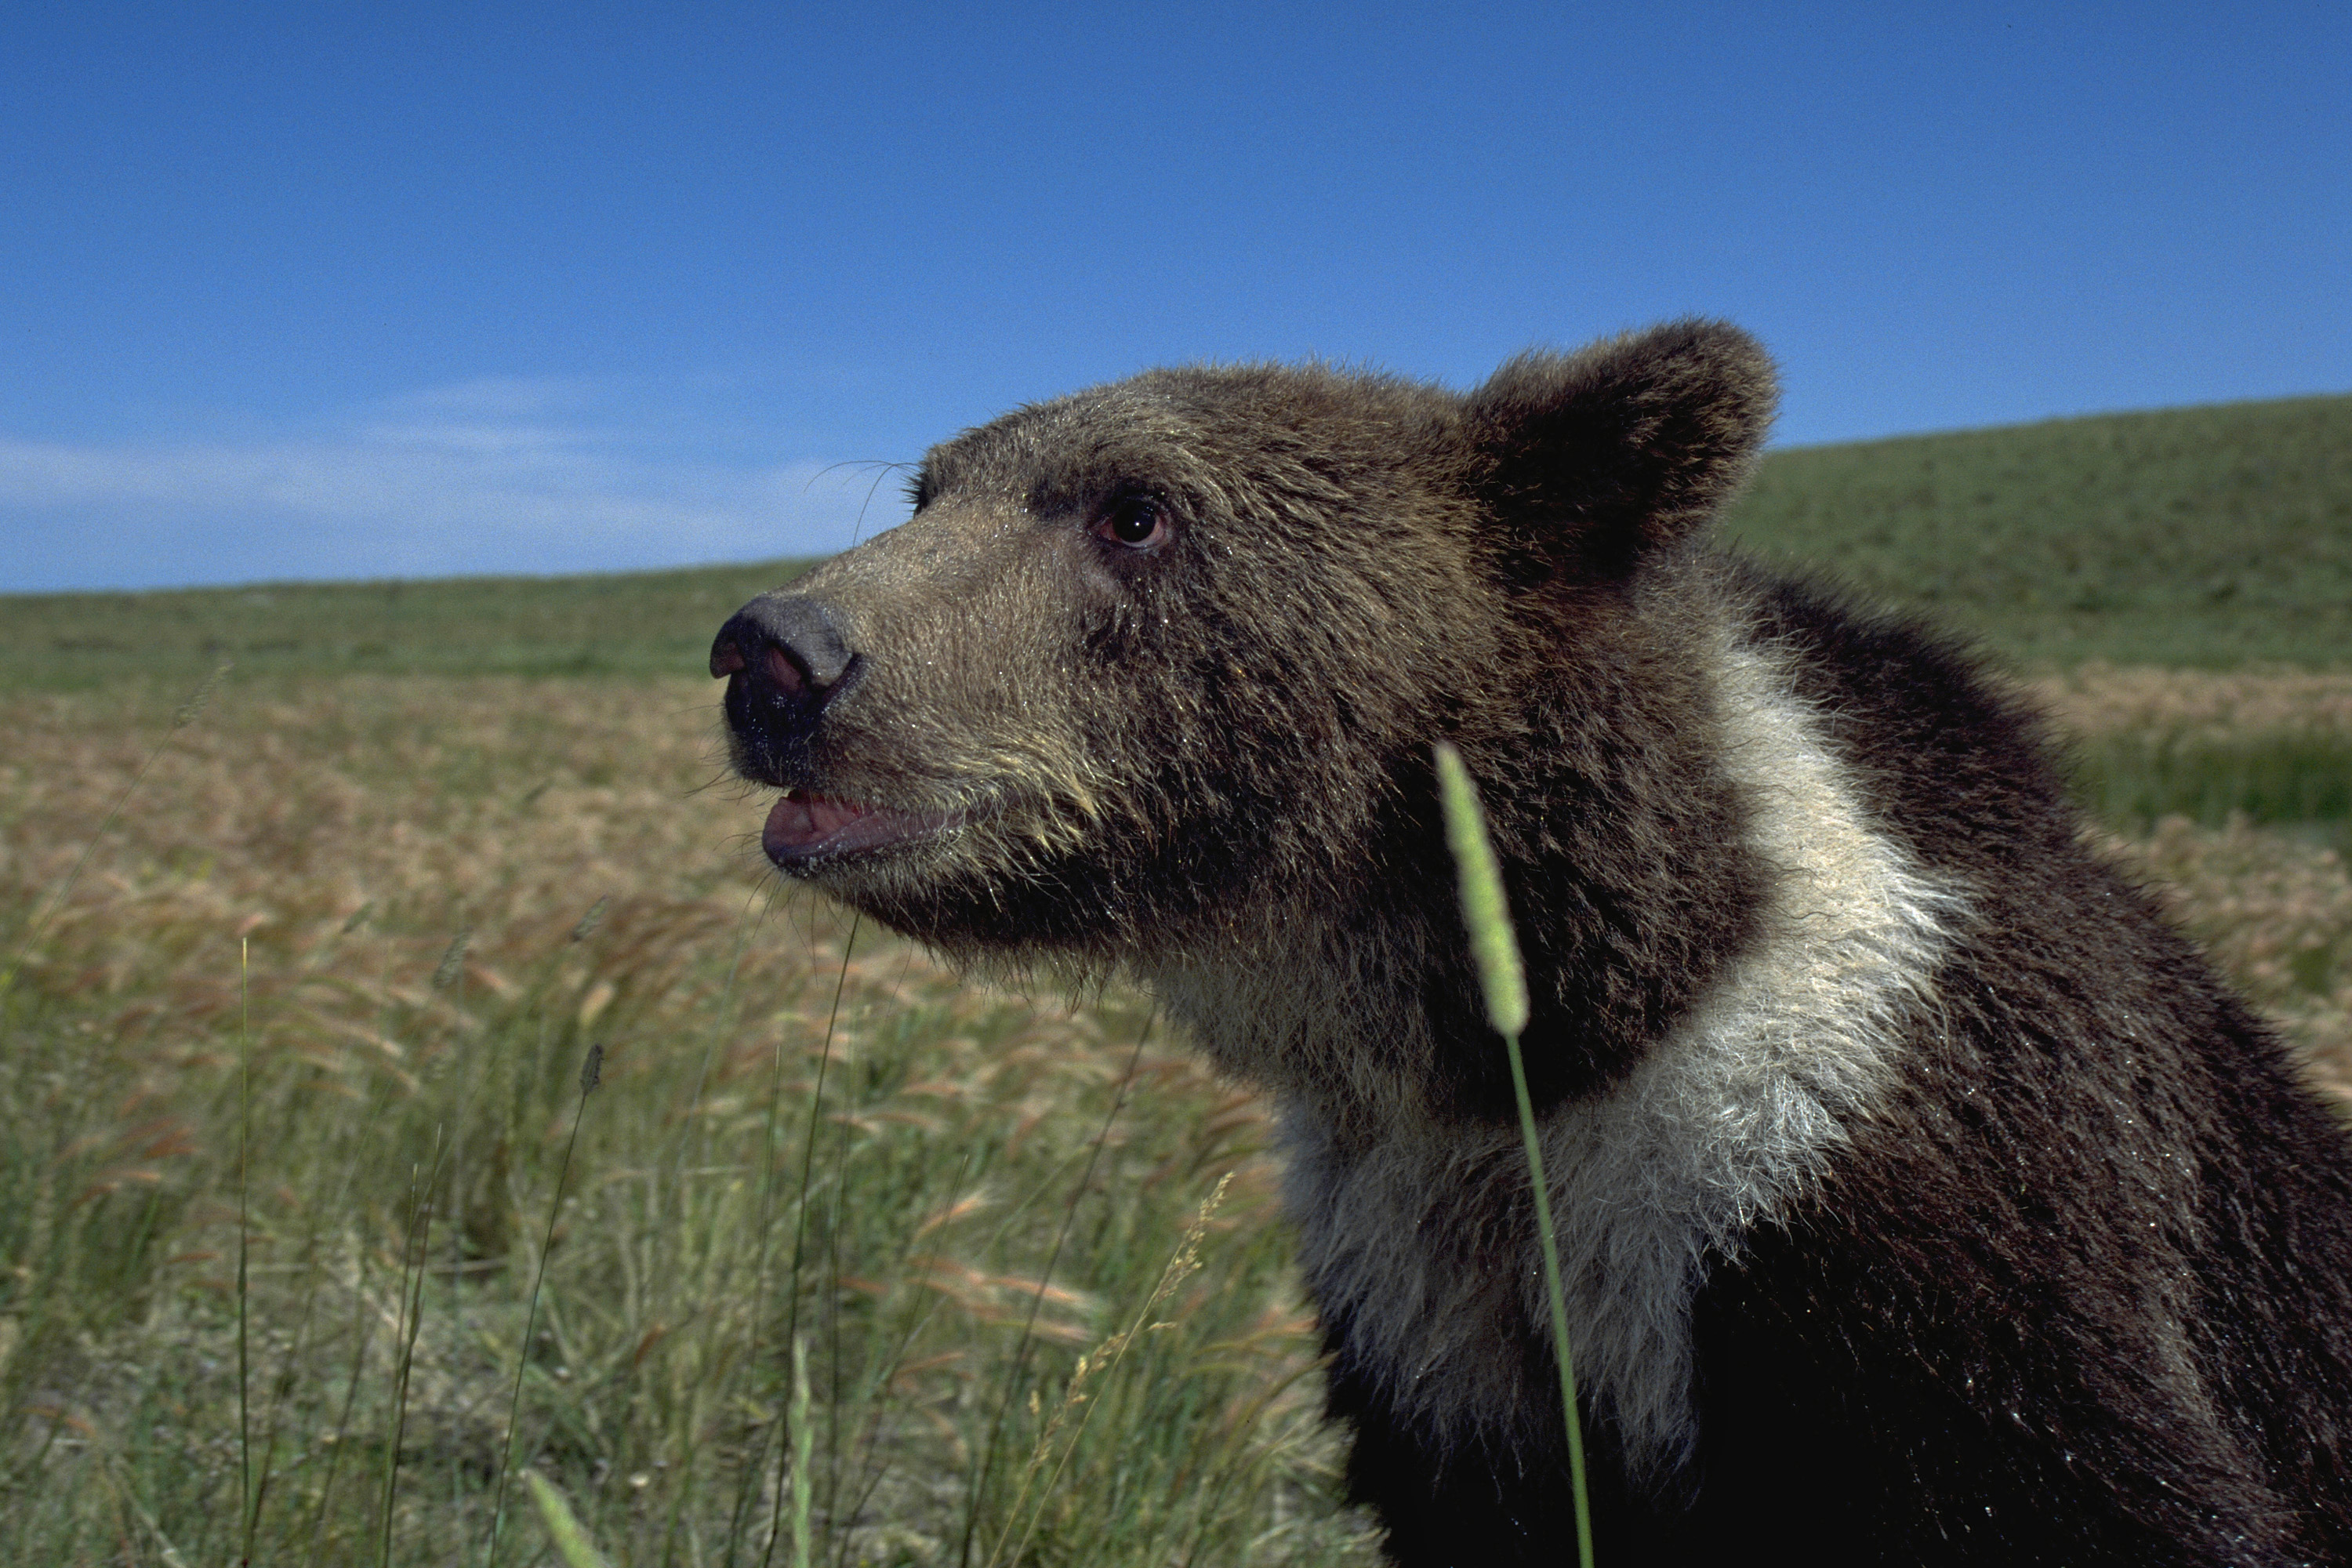 We should be doing more to protect grizzly bears, not less • Daily Montanan